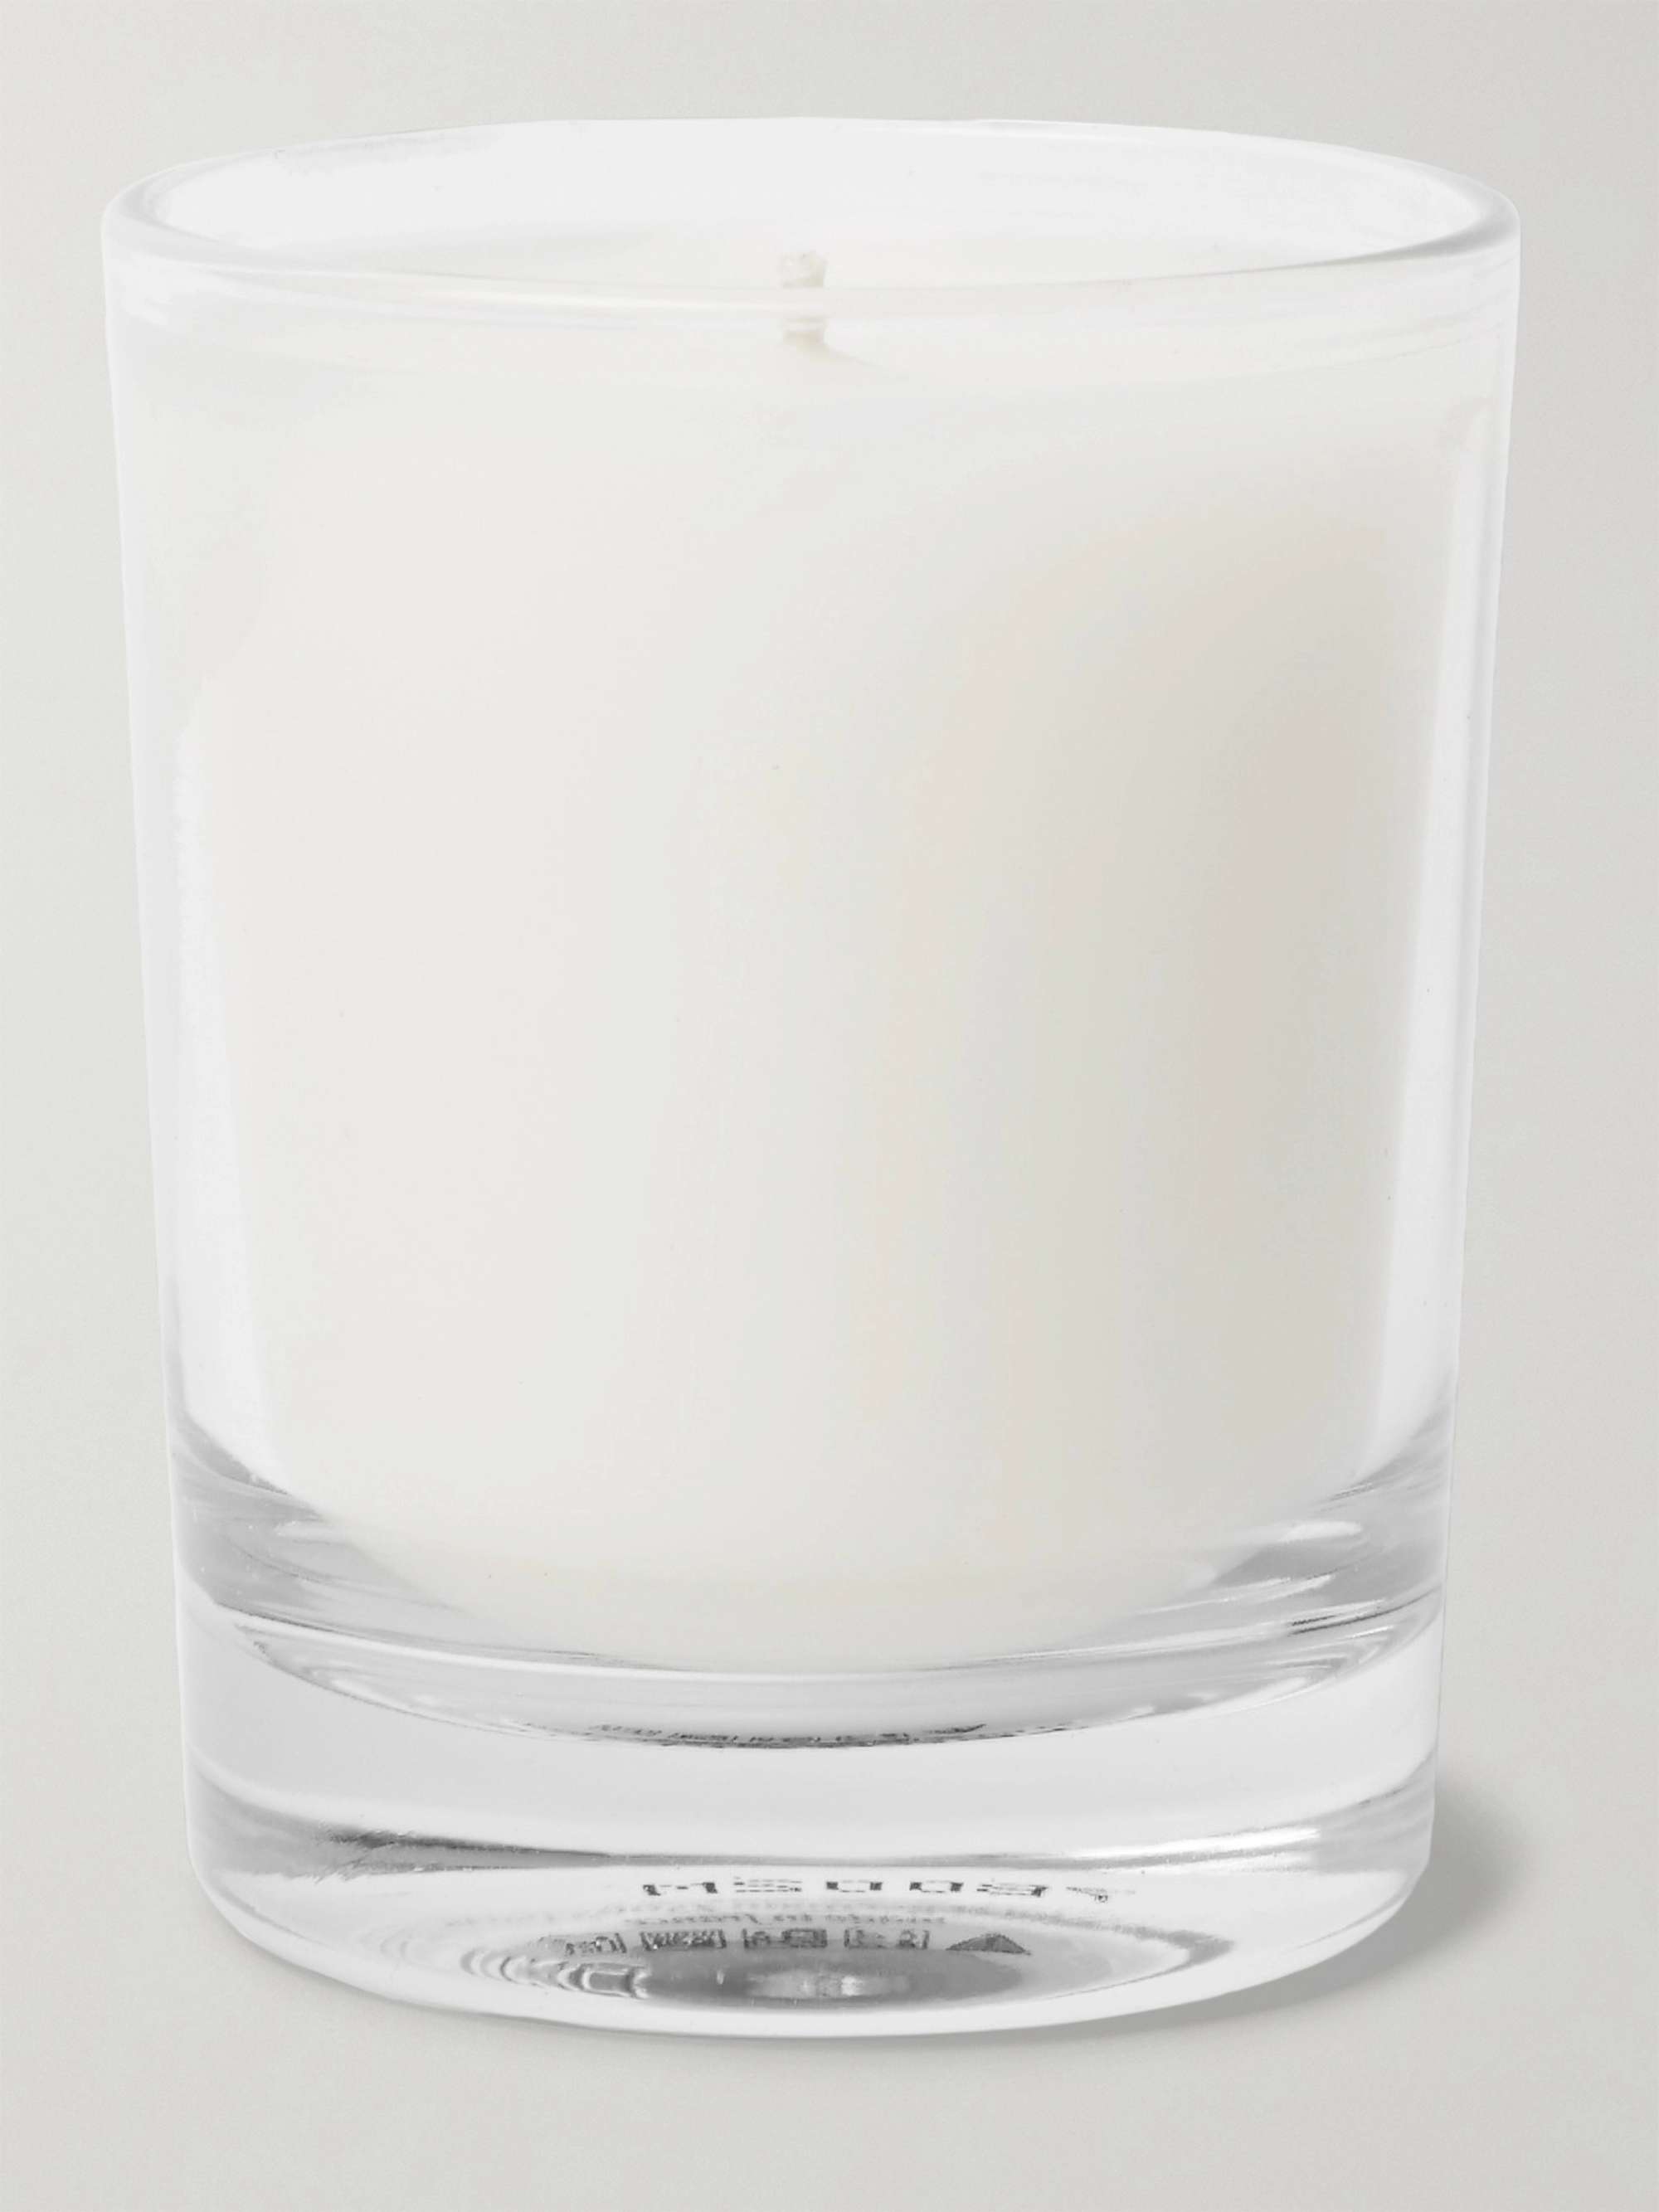 DIPTYQUE Figuier Scented Candle, 70g